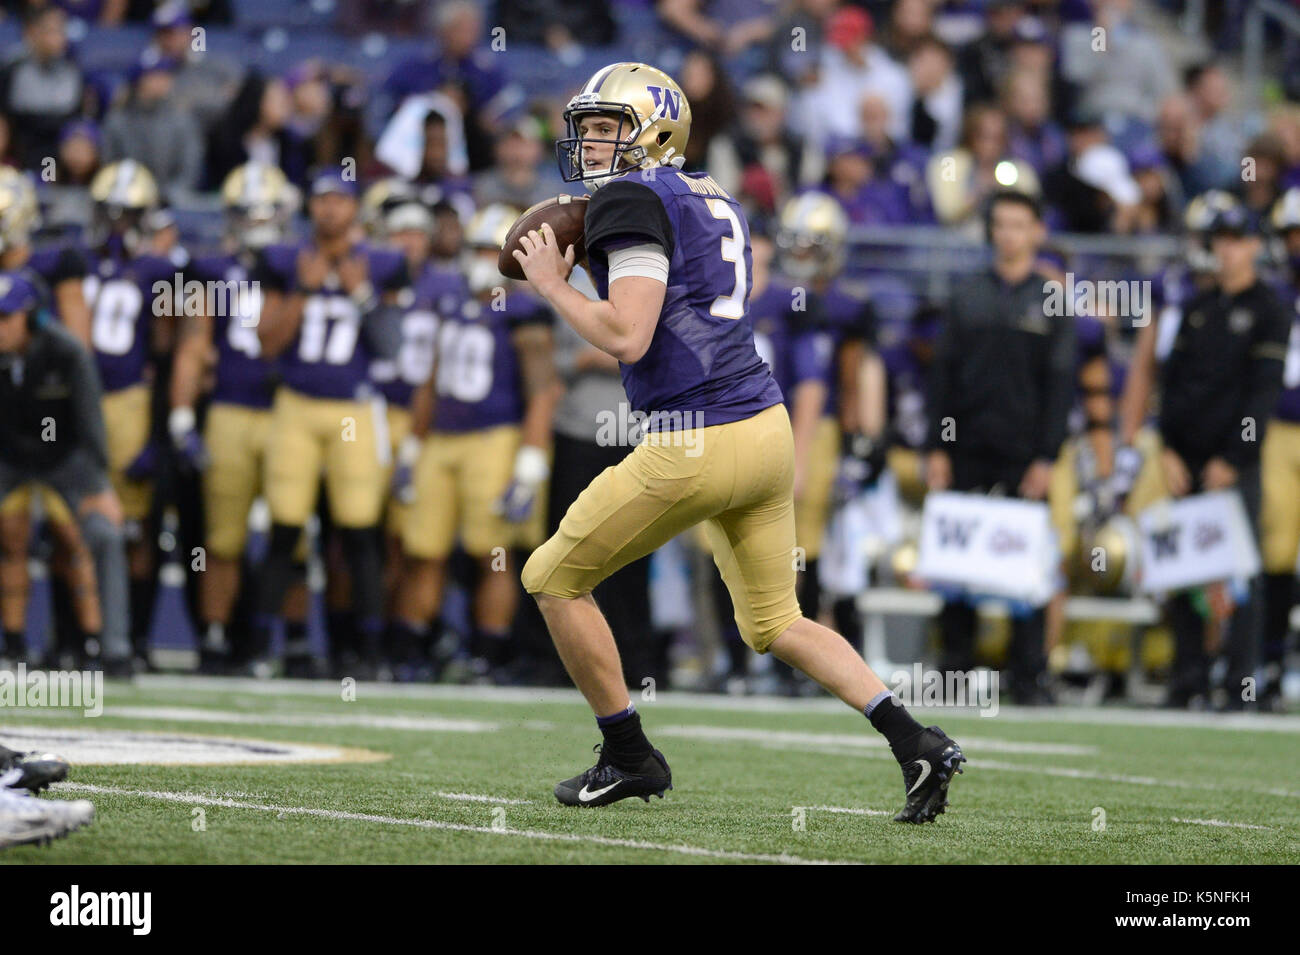 Seattle, WA, USA. 9th Sep, 2017. UW quarterback Jake Browing (3) in action during a game between the Montana Grizzlies and the Washington Huskies. The game was played at Husky Stadium on the University of Washington campus in Seattle, WA. Jeff Halstead/CSM/Alamy Live News Stock Photo